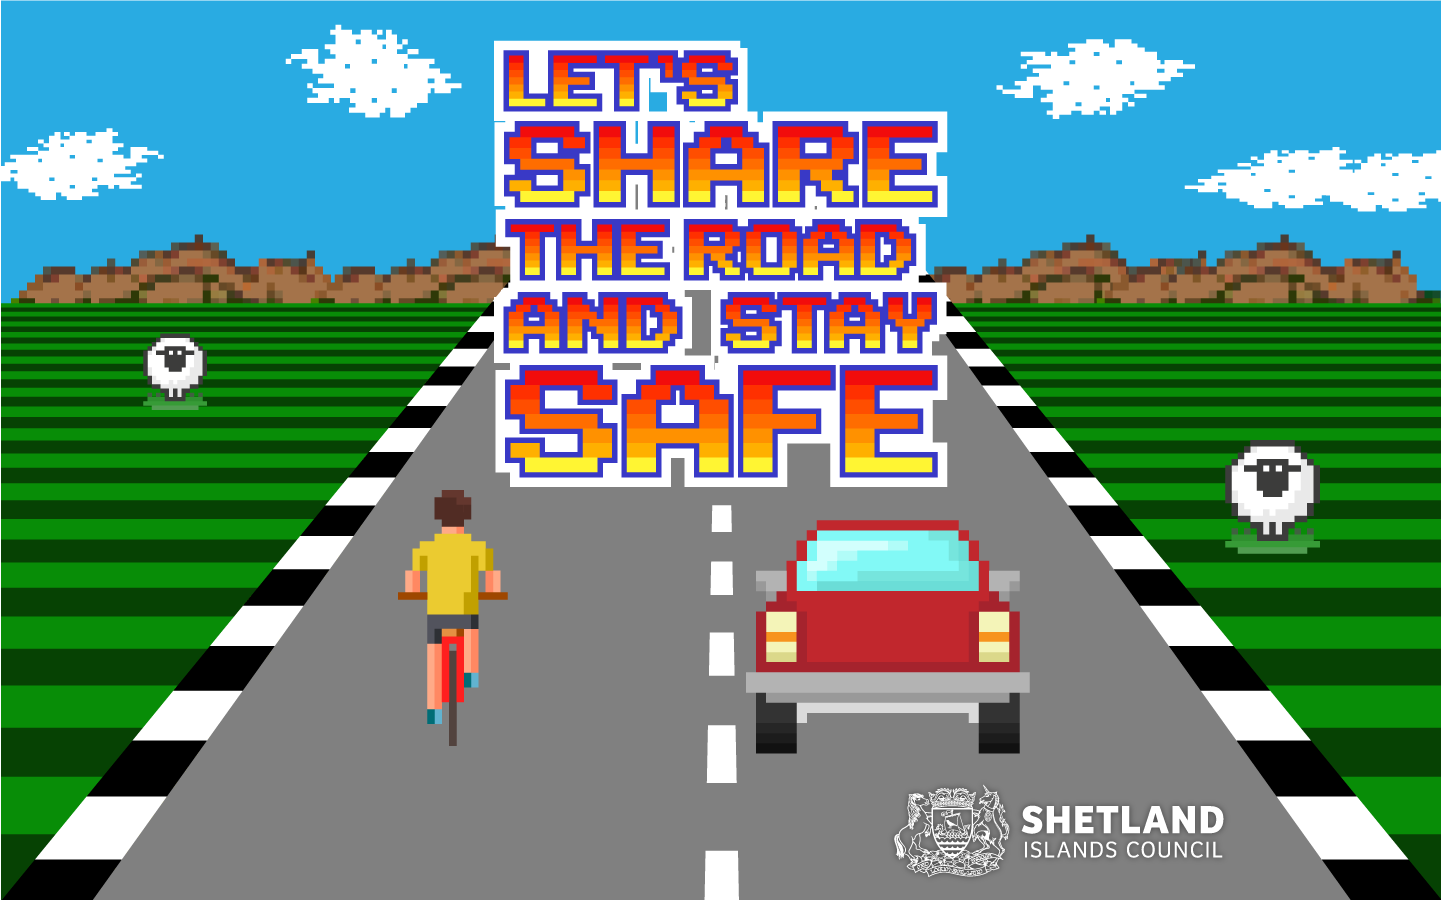 as Shetland’s cyclists get out and about on their bikes the Council’s Roads Safety team has launched a campaign to remind us all to stay safe on the roads